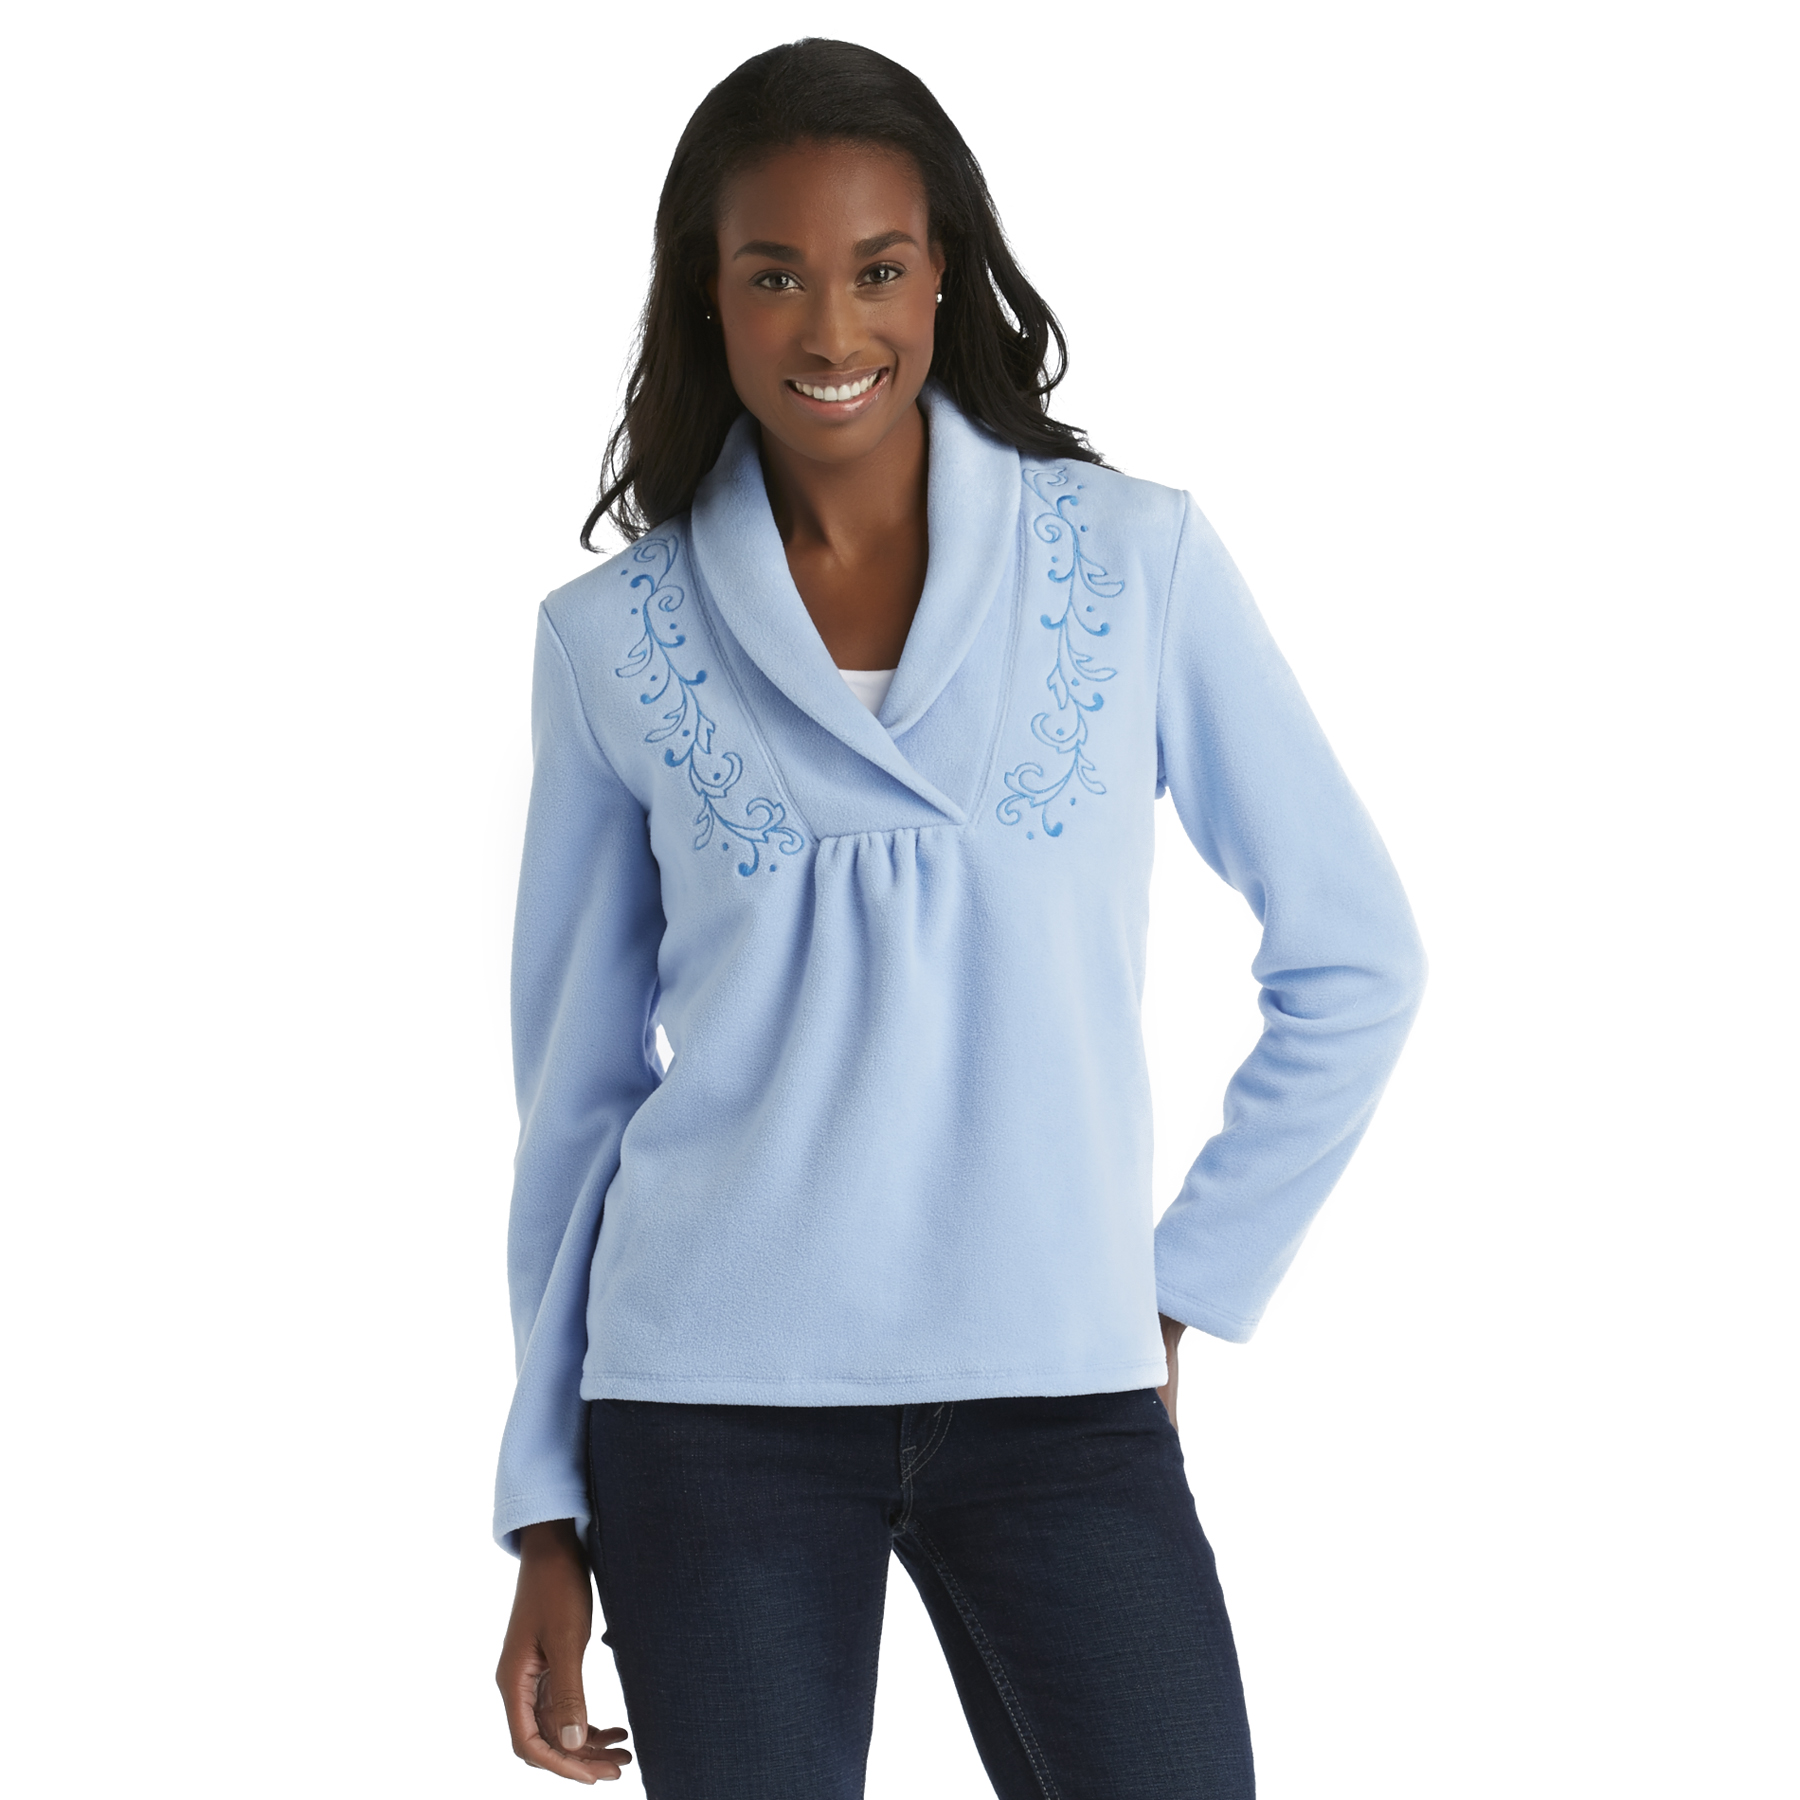 Basic Editions Women's Fleece Top - Embroidered